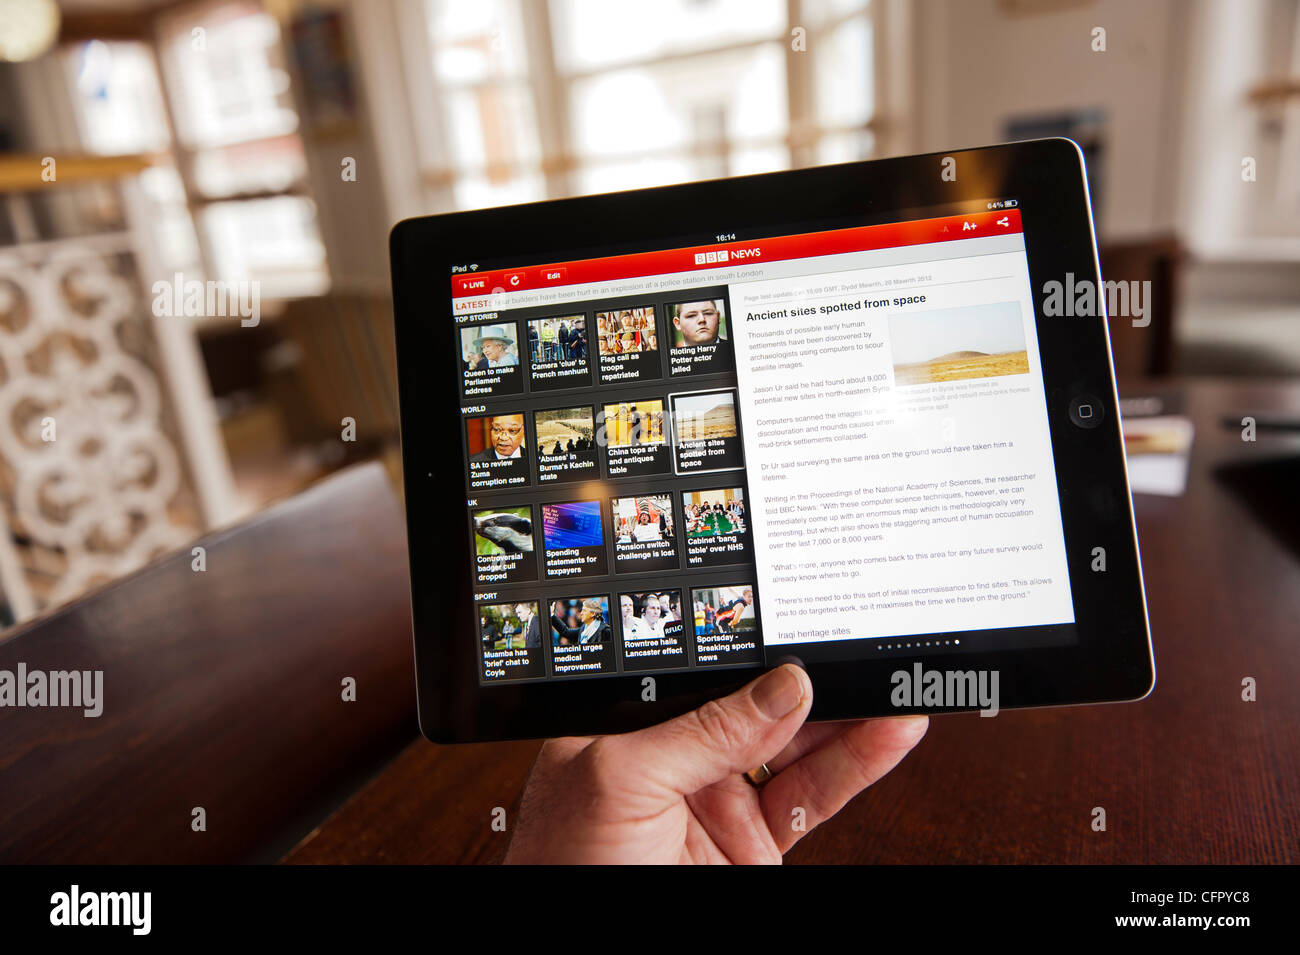 Using Apple's new iPad3 tablet computer to browse the BBC news website, in a cafe bar UK Stock Photo